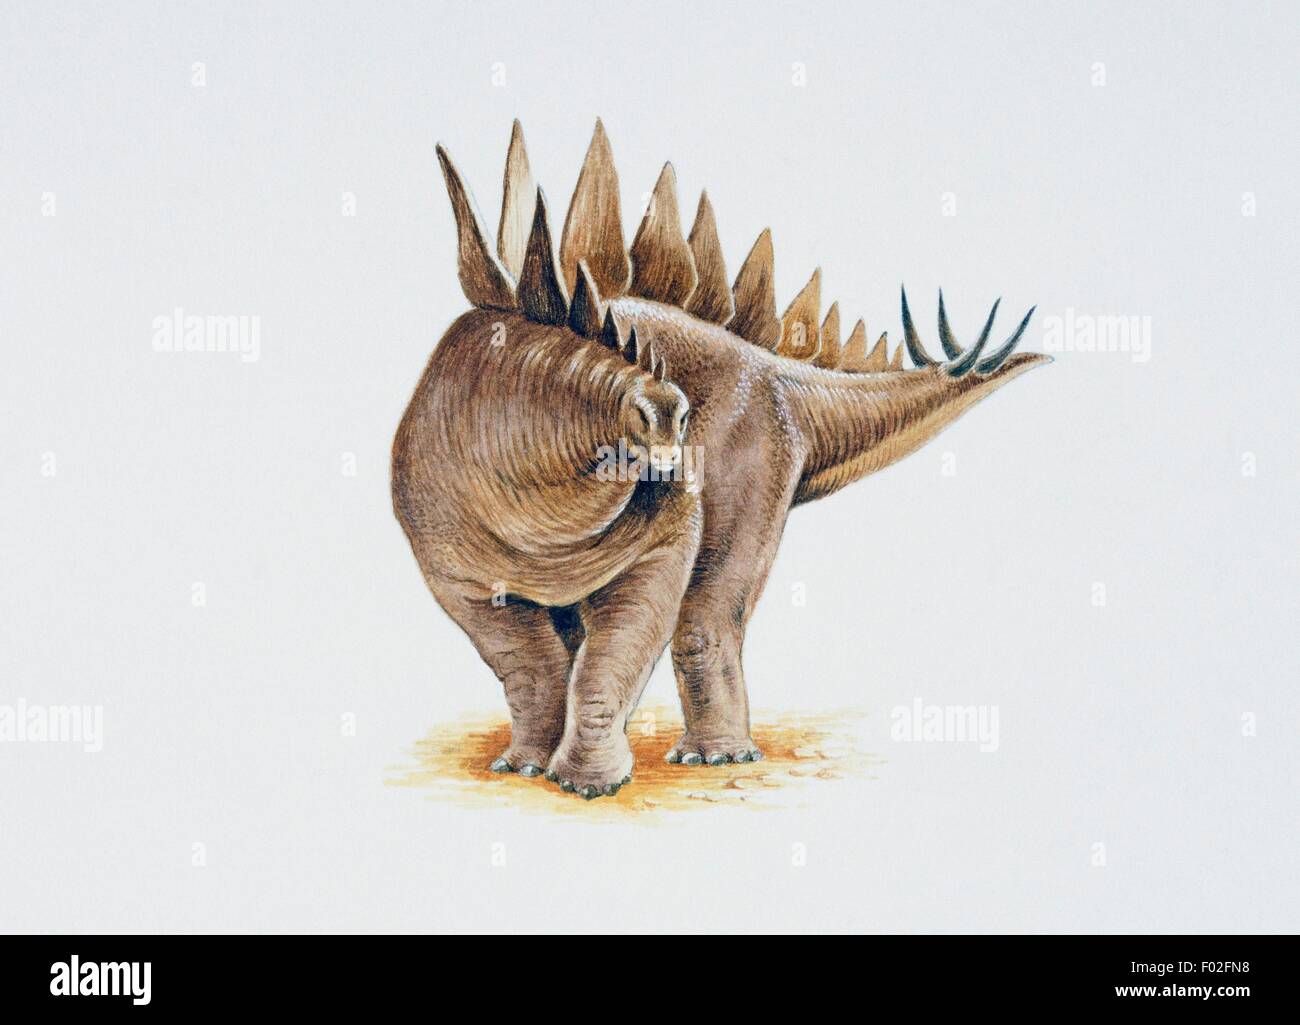 Stegosaurus with one row of slightly overlapping plates. Artwork by Nick Pike. Stock Photo